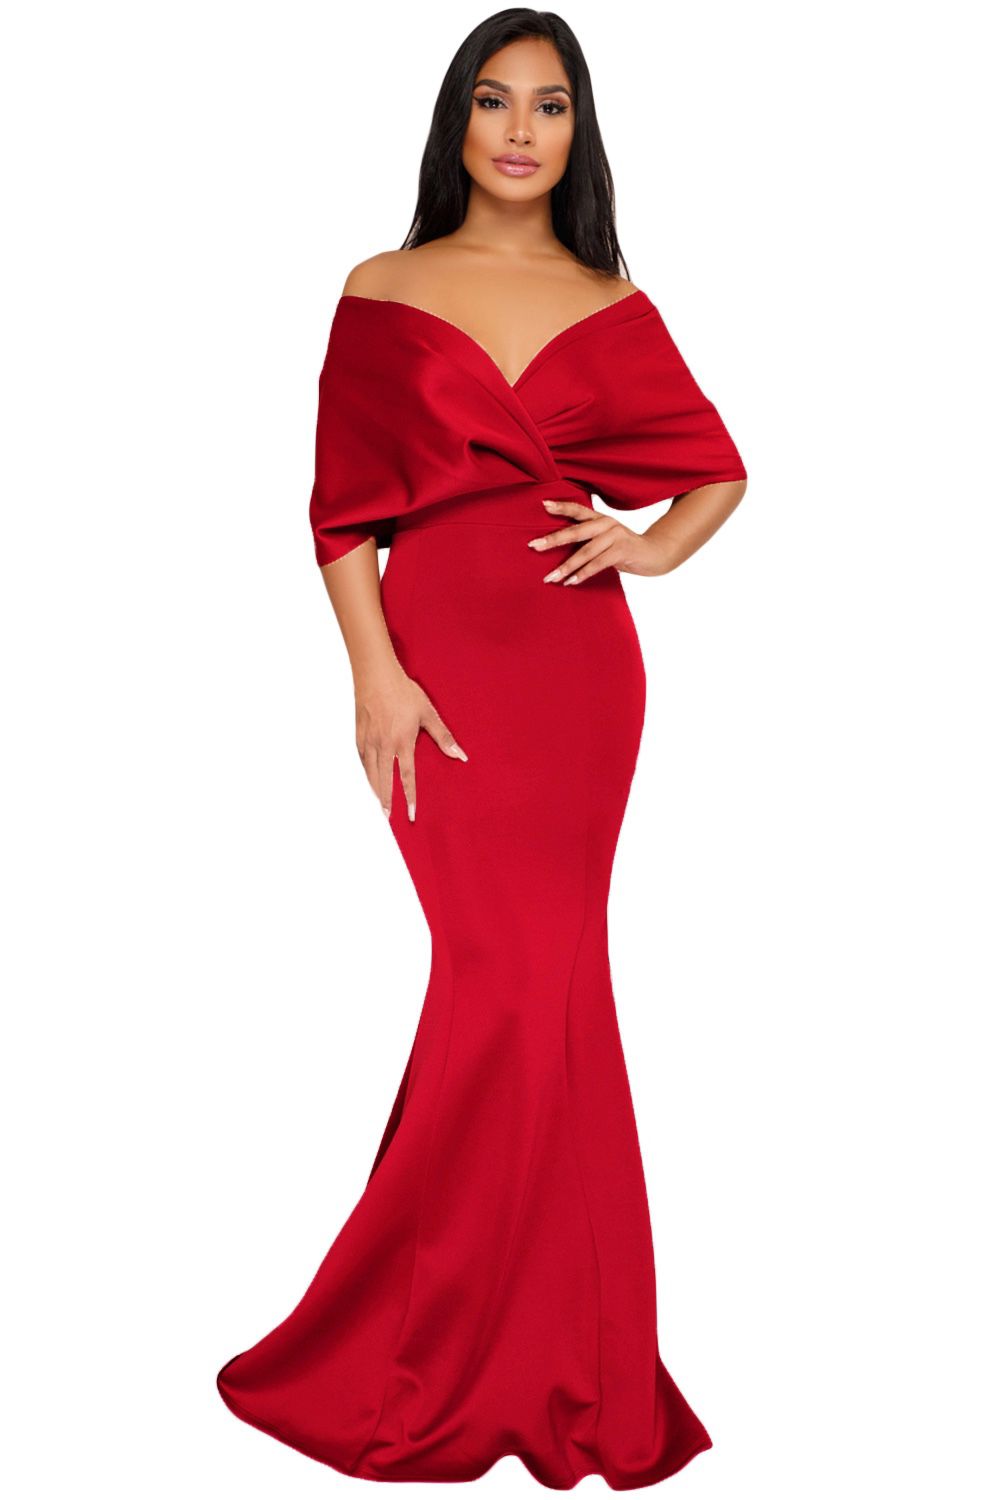 2 way Red Off The Shoulder Mermaid Maxi Dress Size Small 4-6